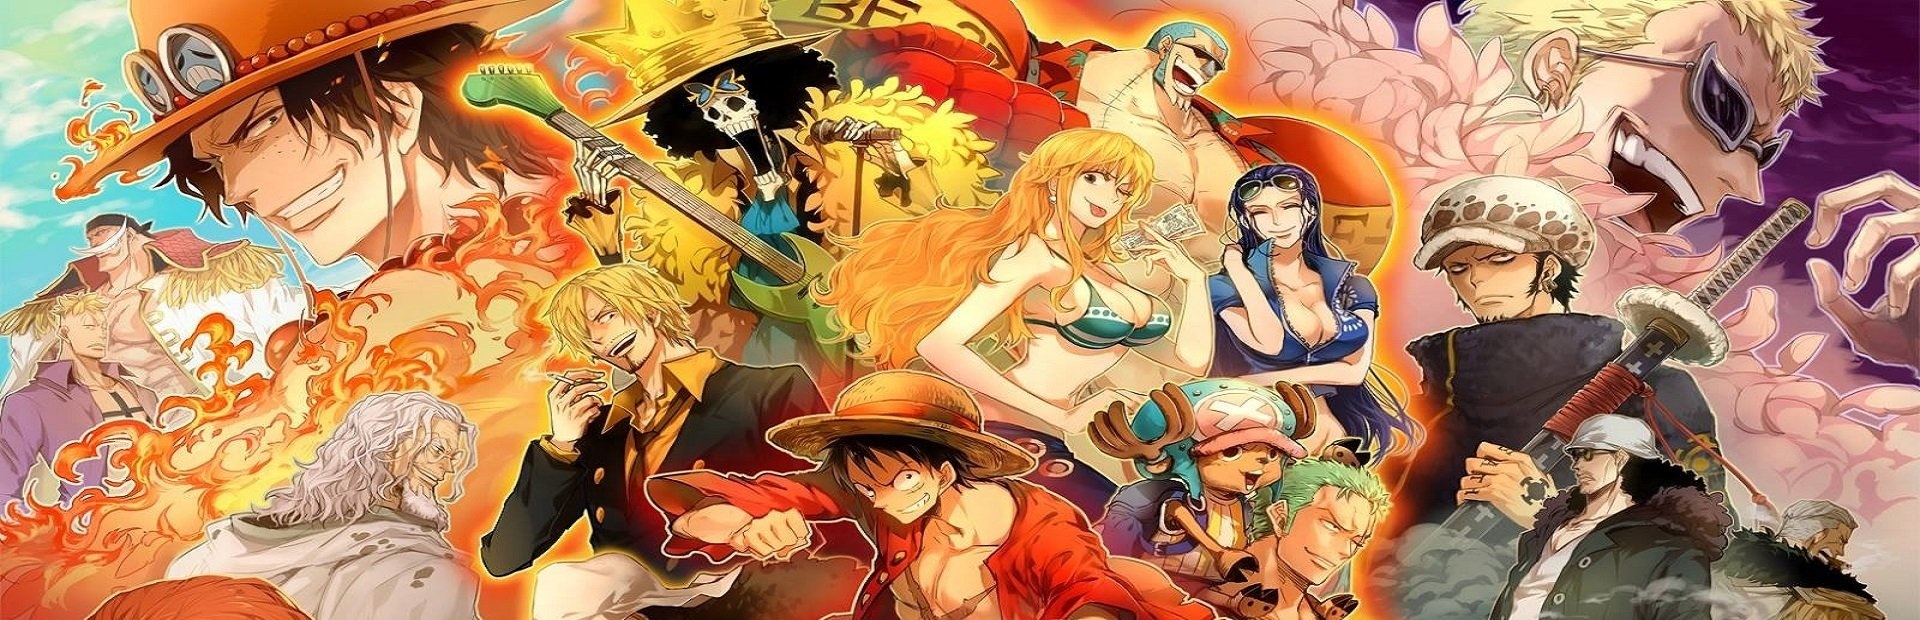 One Piece Pirate Warriors 3 Steamgriddb